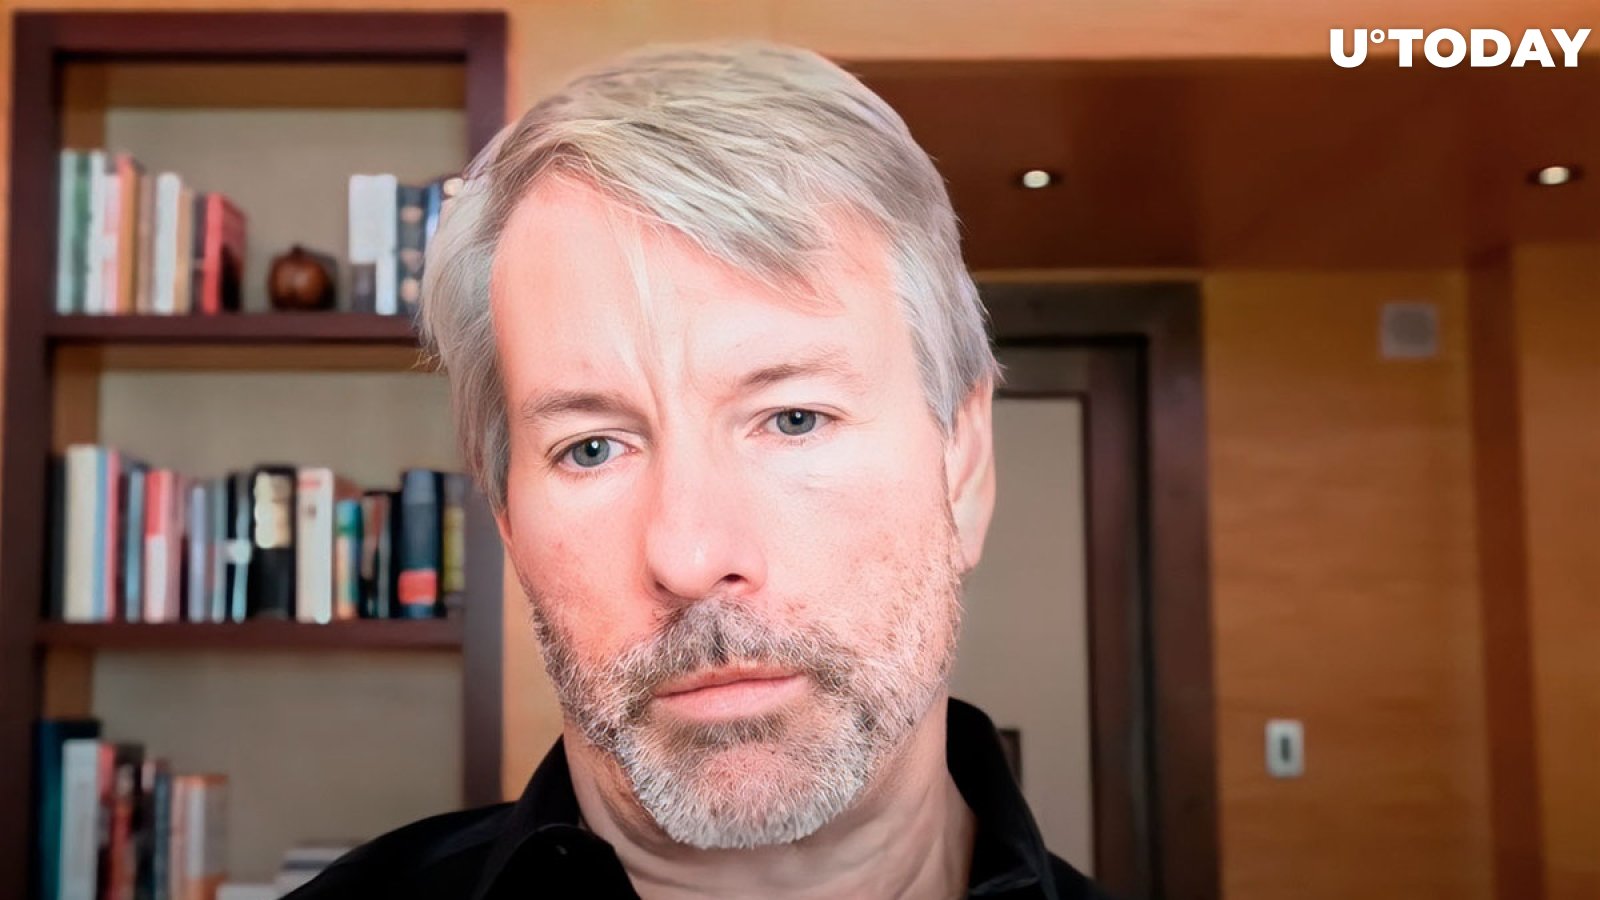 Michael Saylor, Who Owns 130,000 BTC, Gives Advice to Crypto Investors